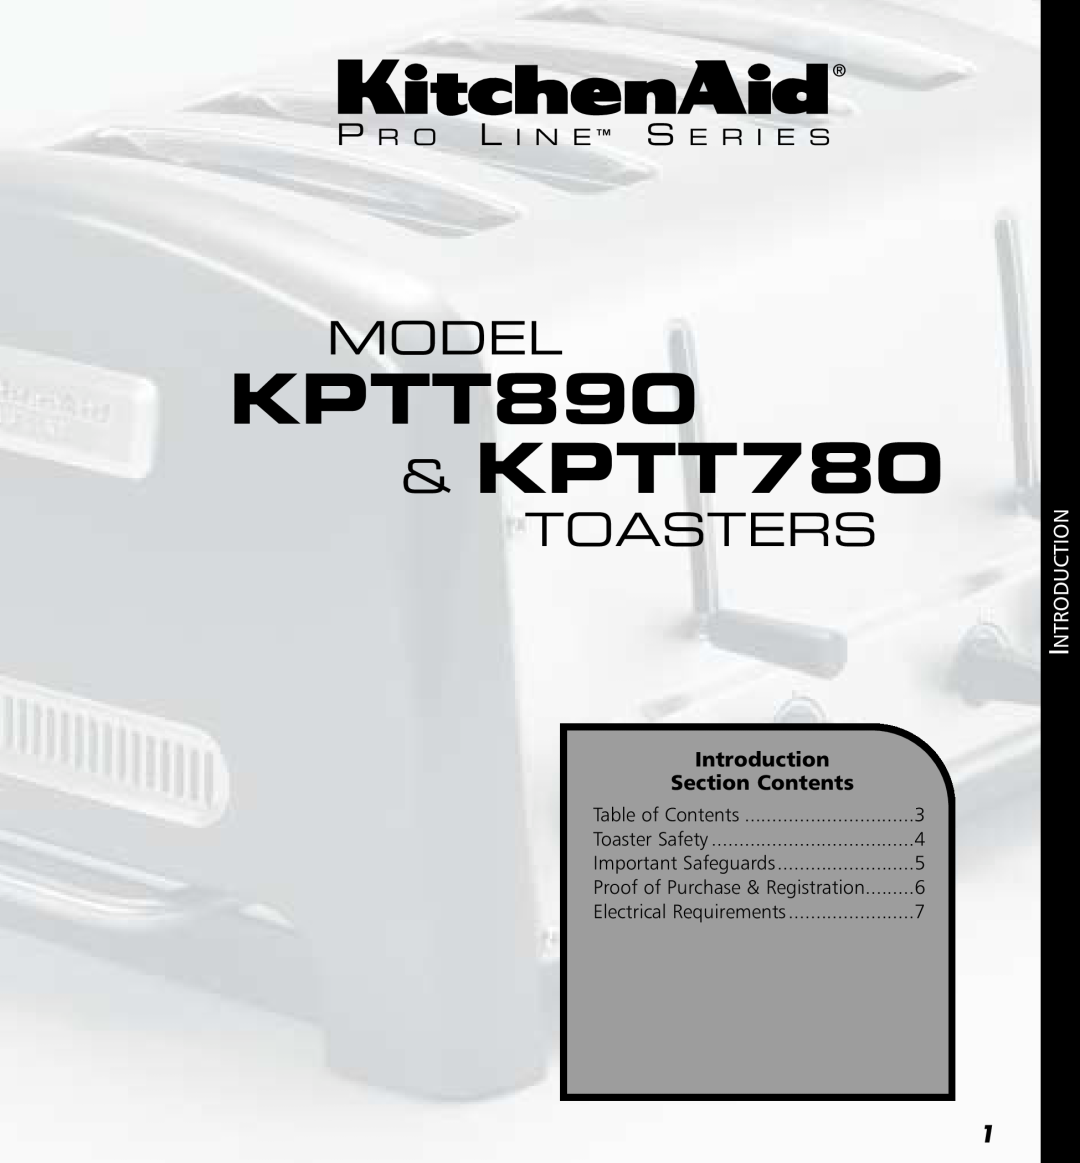 KitchenAid KPTT890 KPTT780, Model, Toasters, P R O L I N E S E R I E S, Introduction, Section Contents, Toaster Safety 